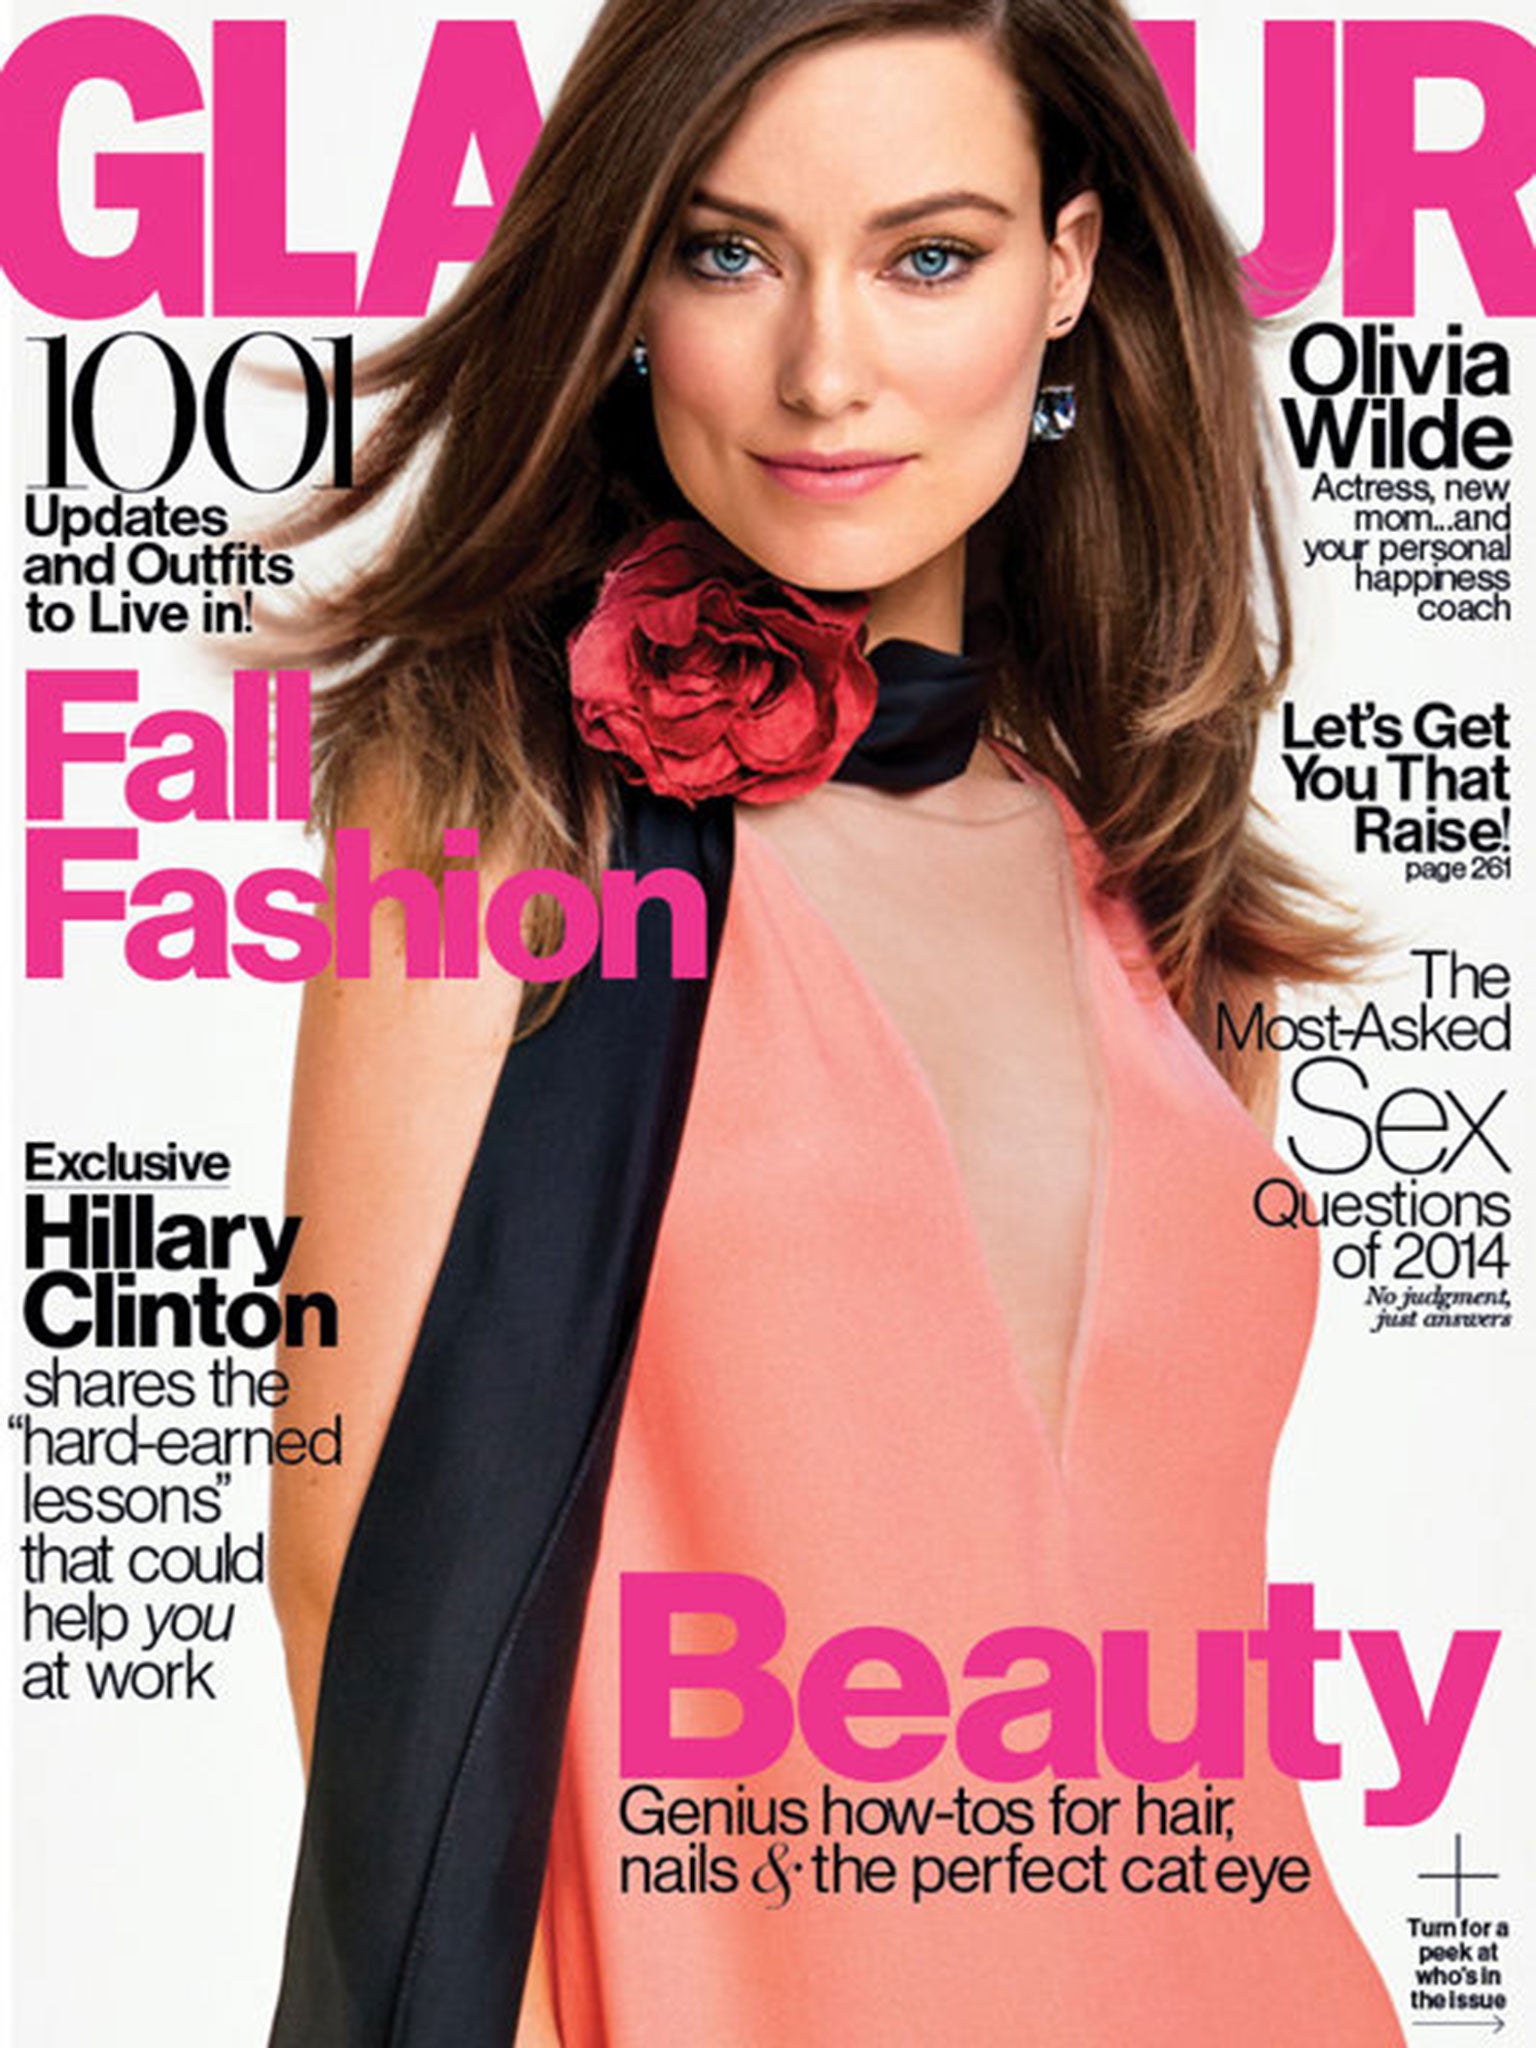 Olivia Wilde is the cover American Glamour's September Issue